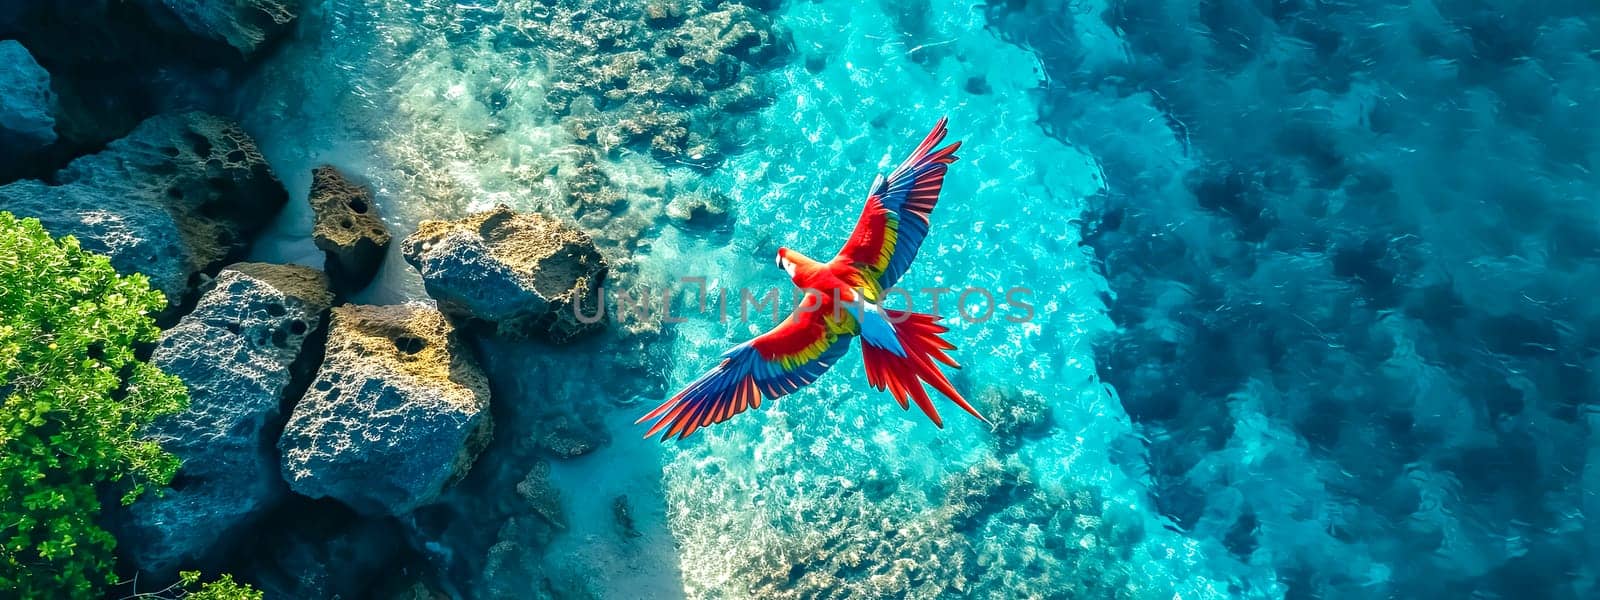 Aerial view of a vividly colored parrot flying over a tropical landscape with crystal clear waters and lush greenery. by Edophoto